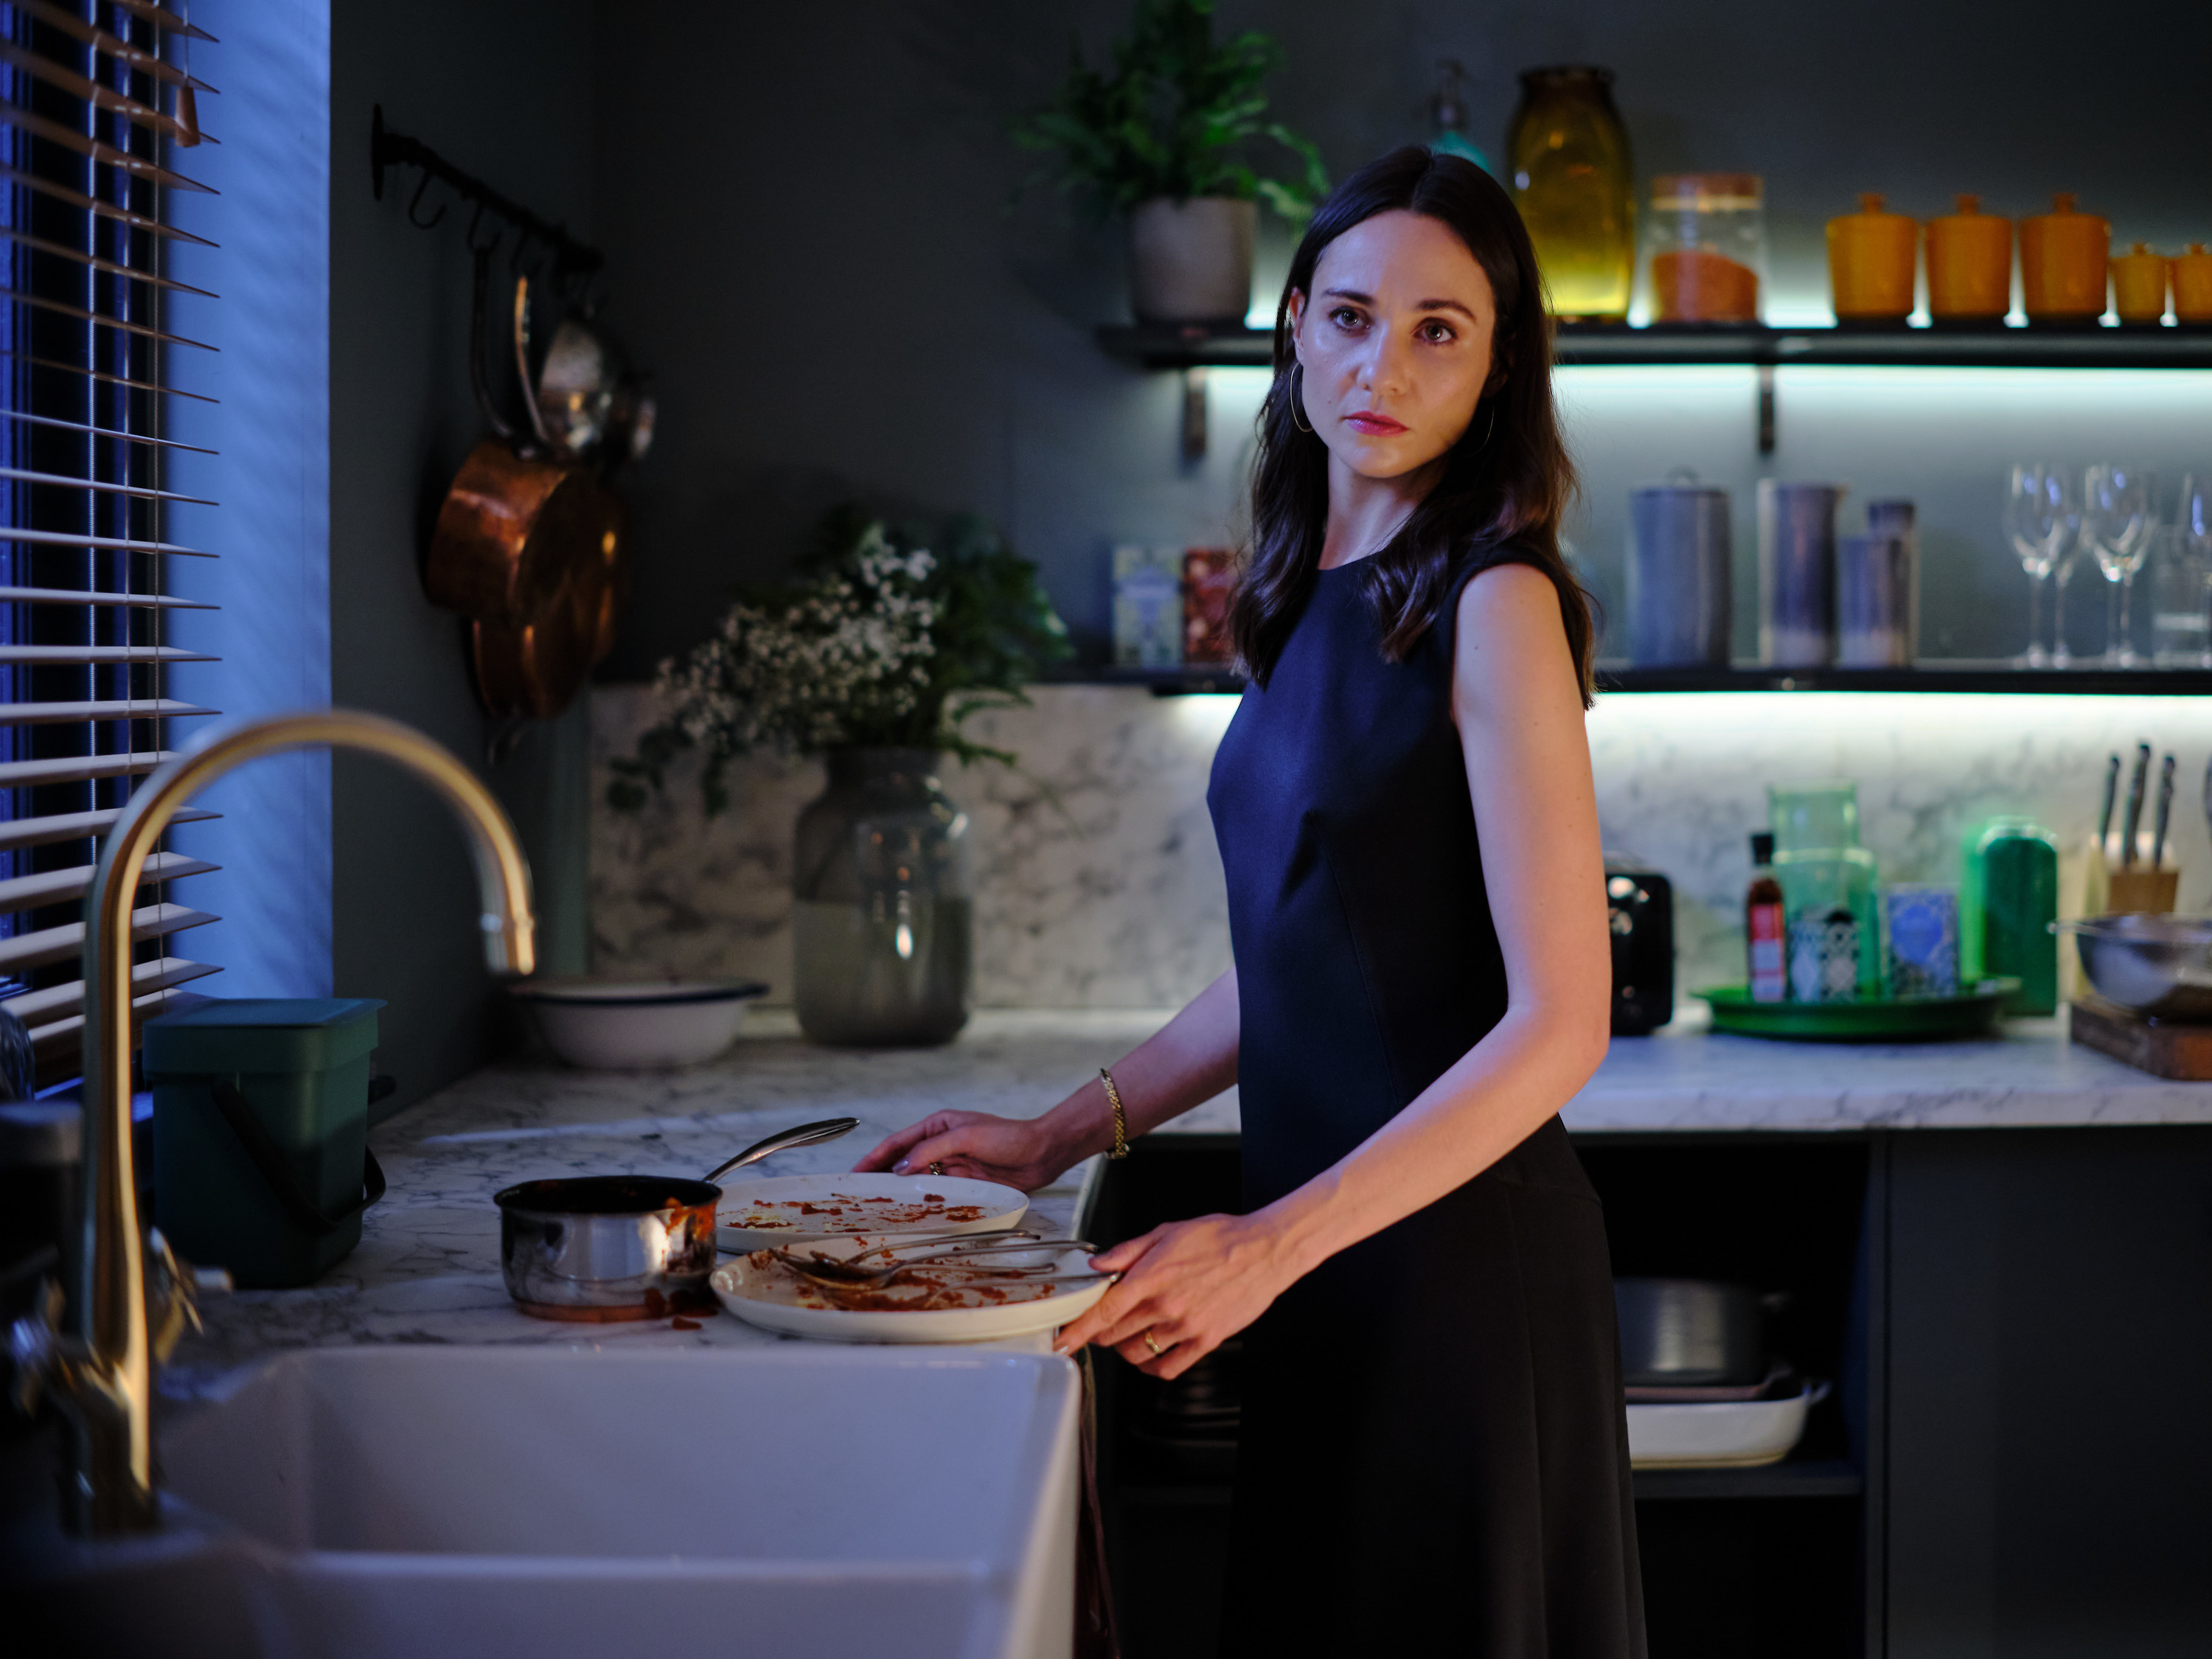 Tuppence Middleton as Fi Lawson putting dirty dishes down by the kitchen sink